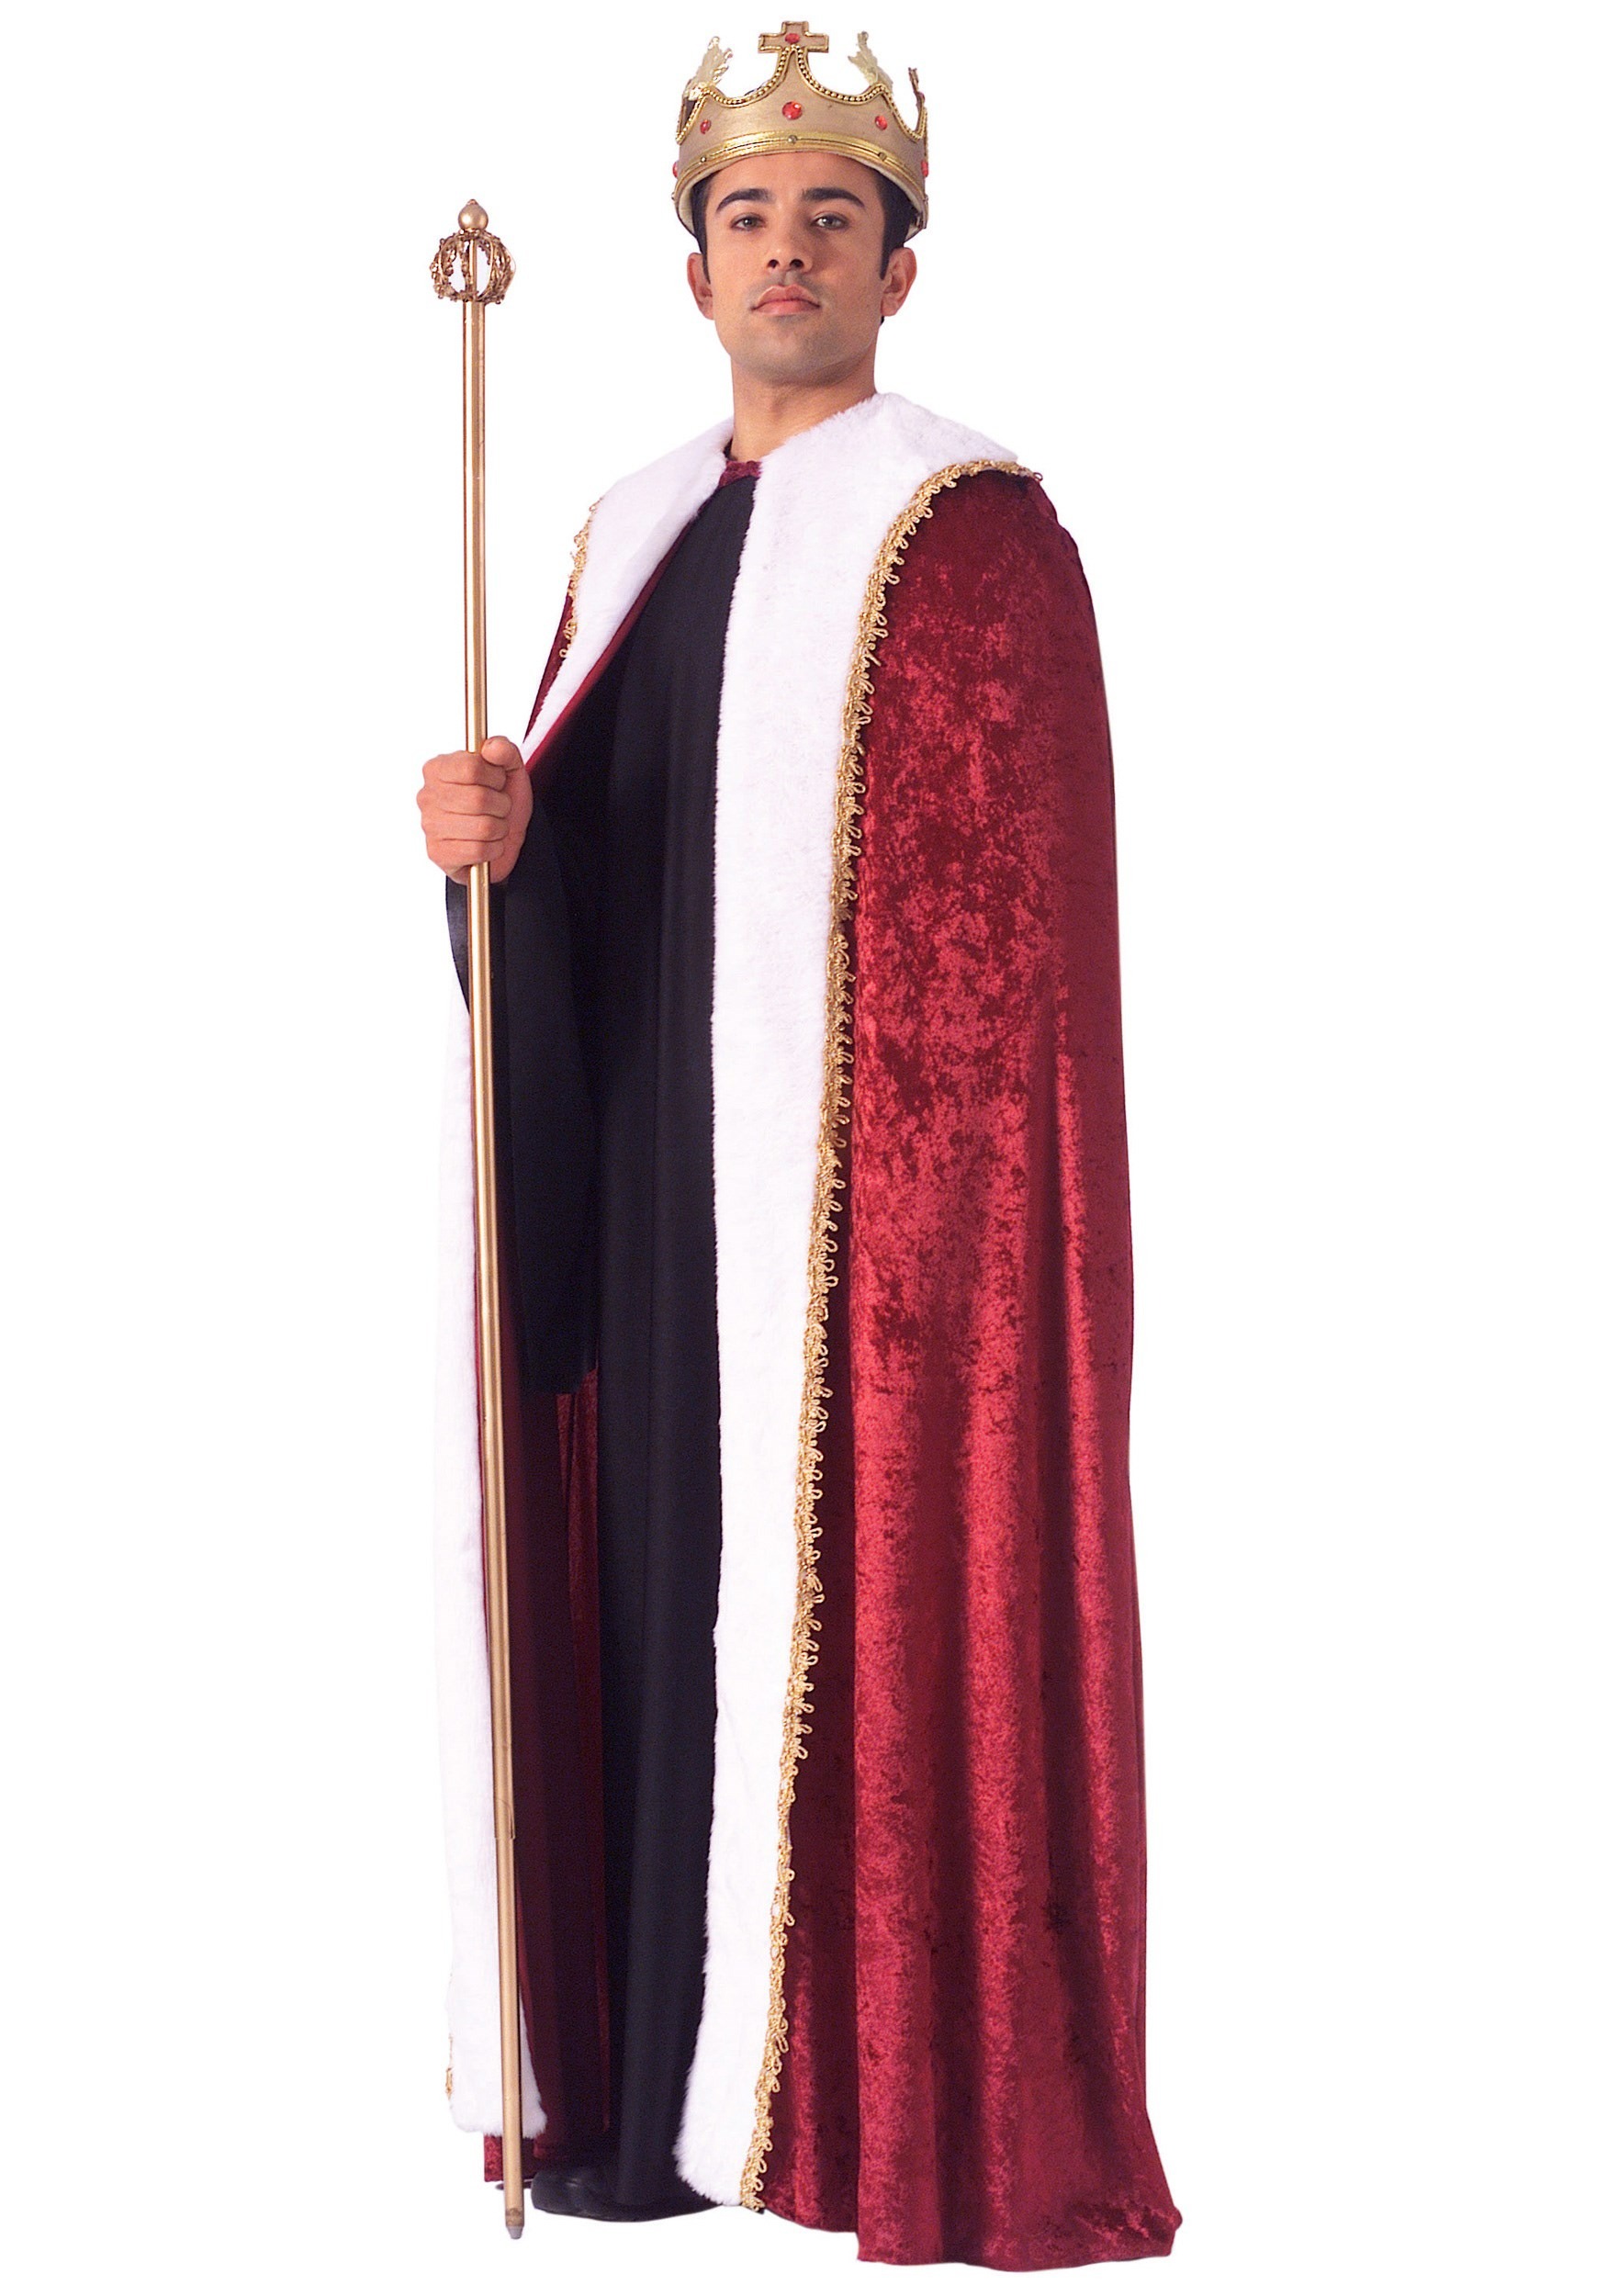 King Of Hearts Robe Fancy Dress Costume For Adults